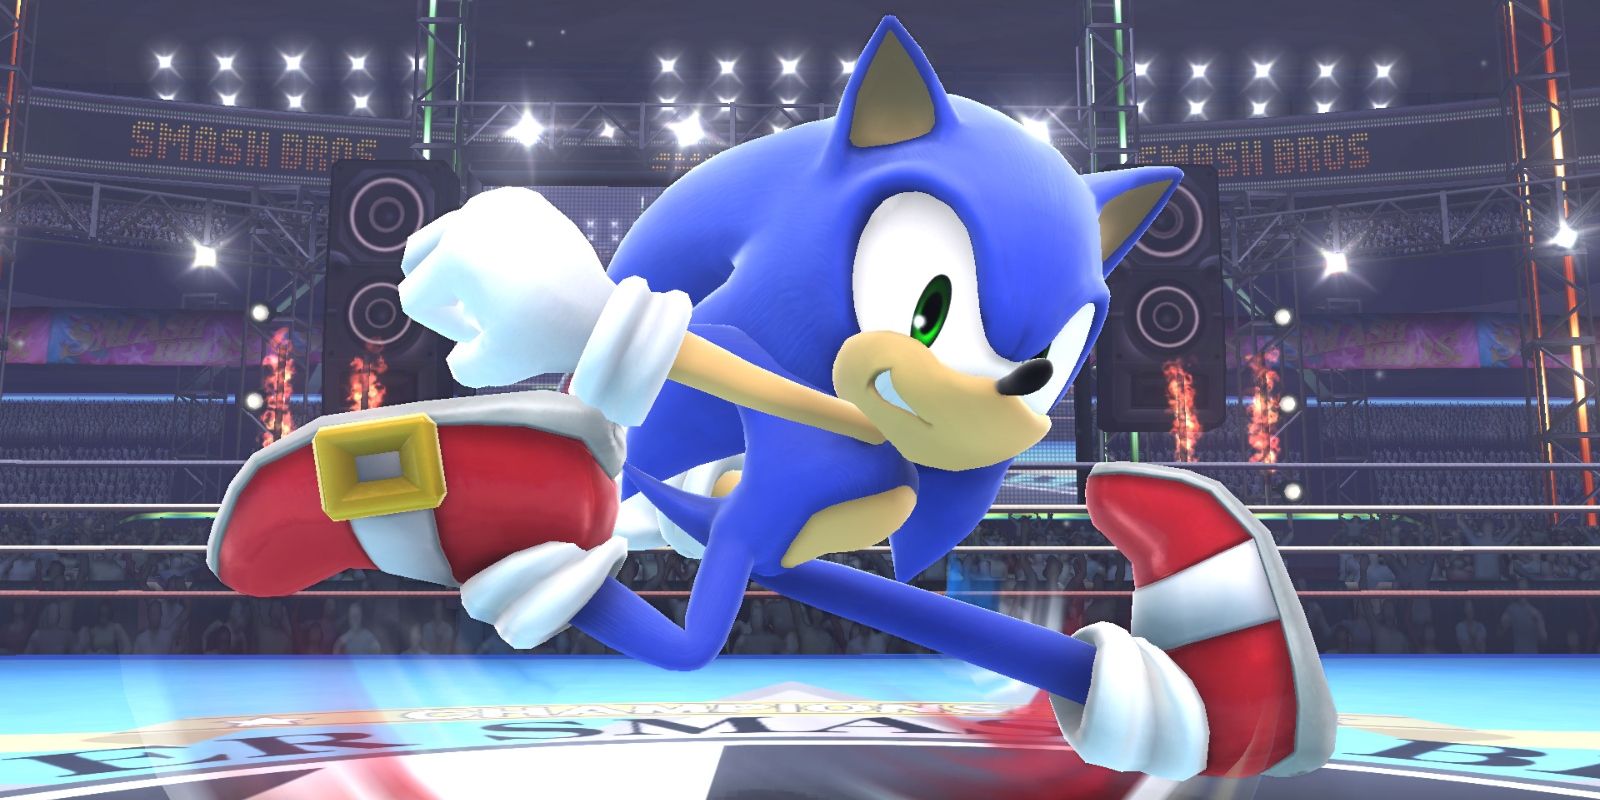 Could Sonic the Hedgehog survive running at supersonic speeds